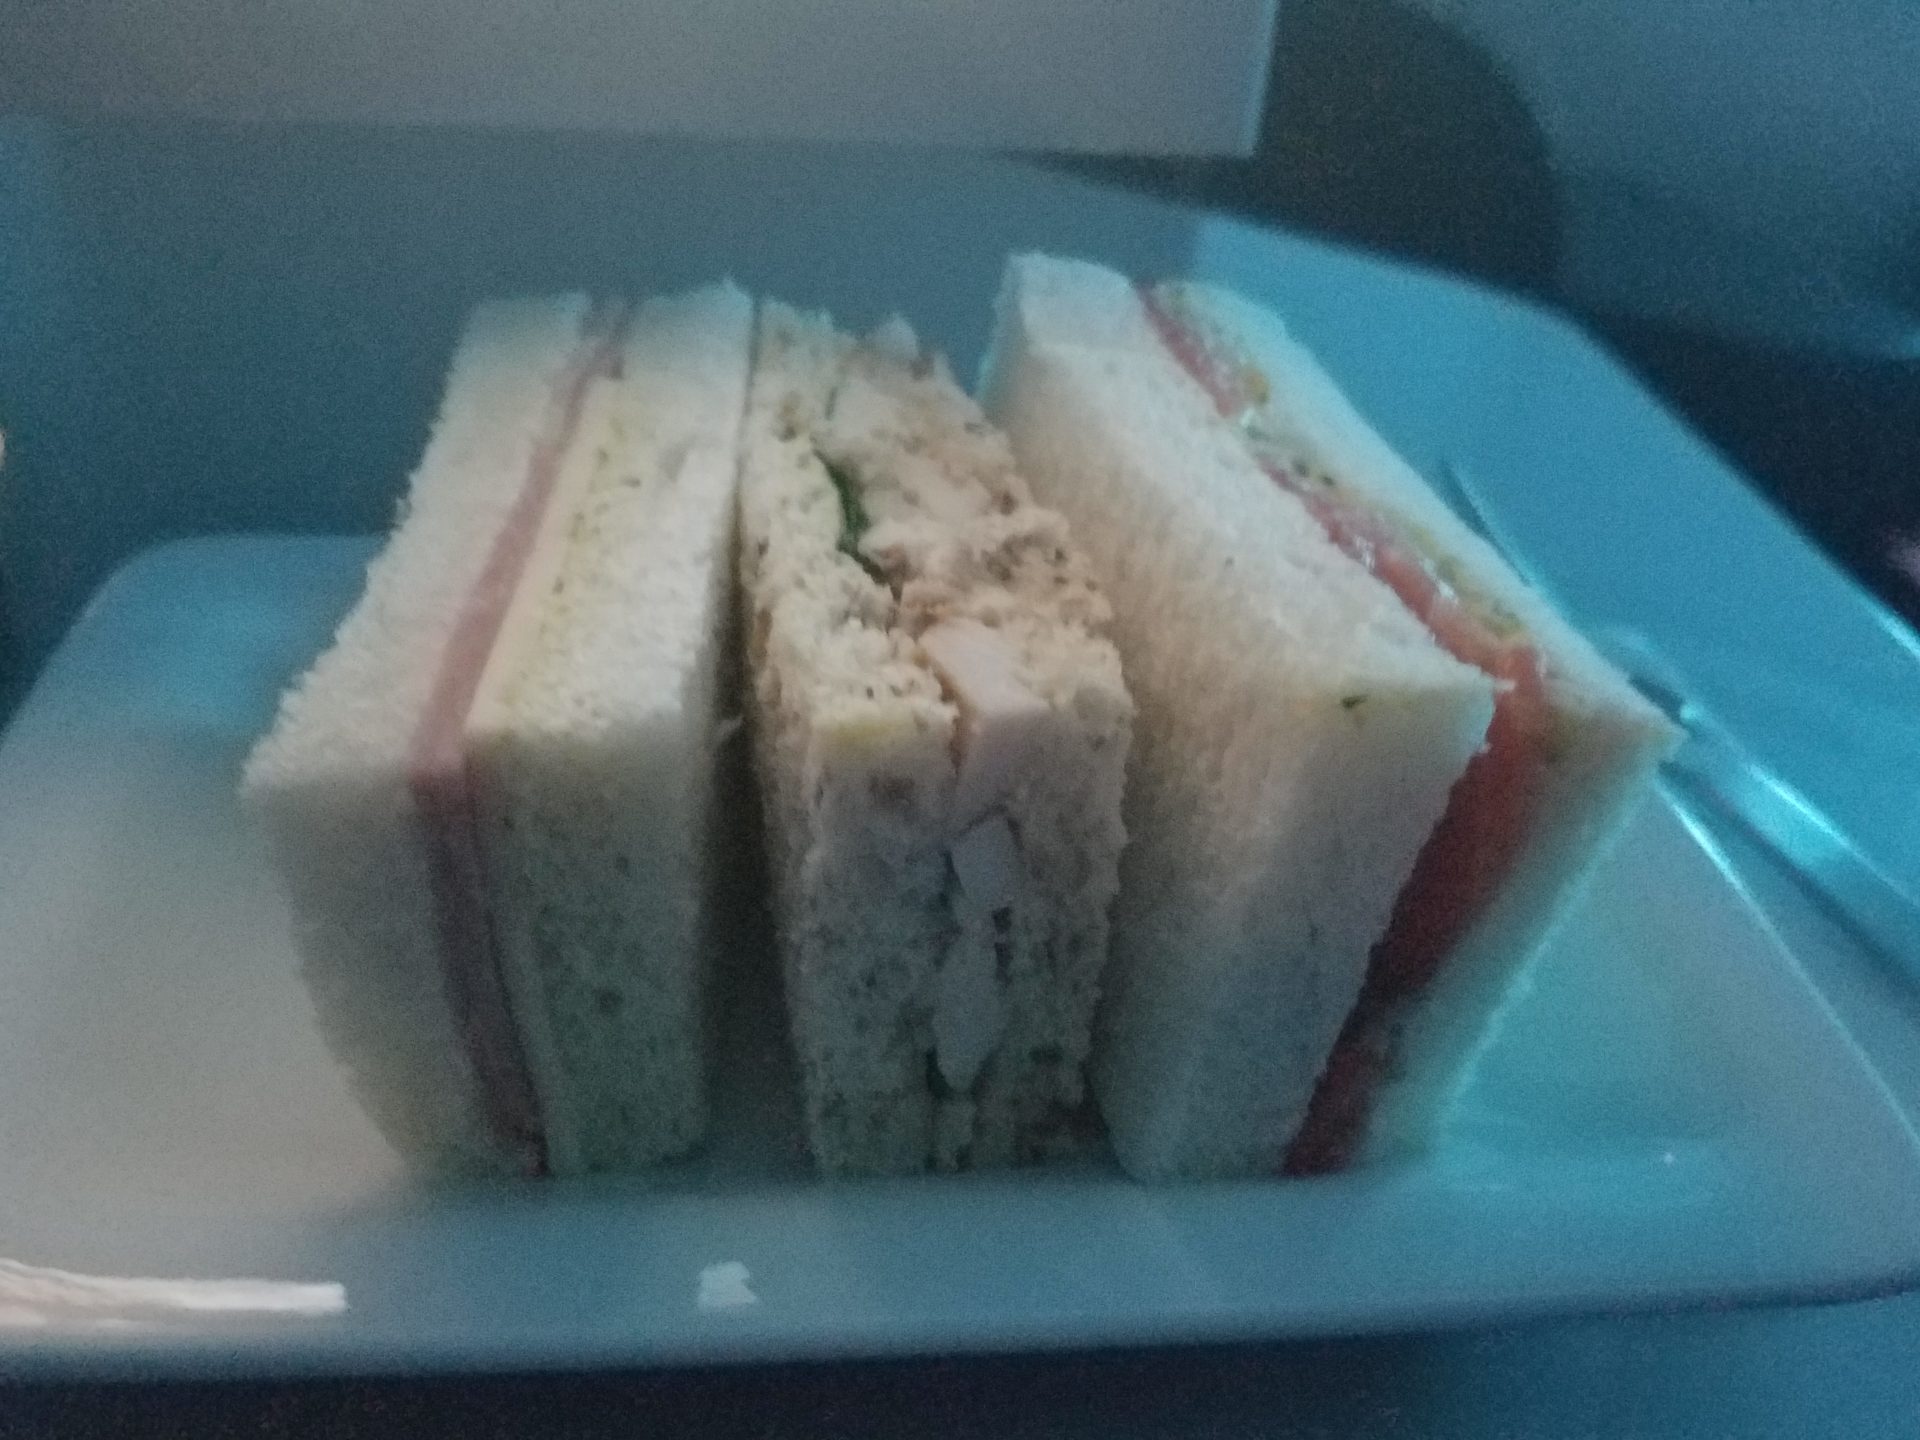 a plate of sandwiches on a table